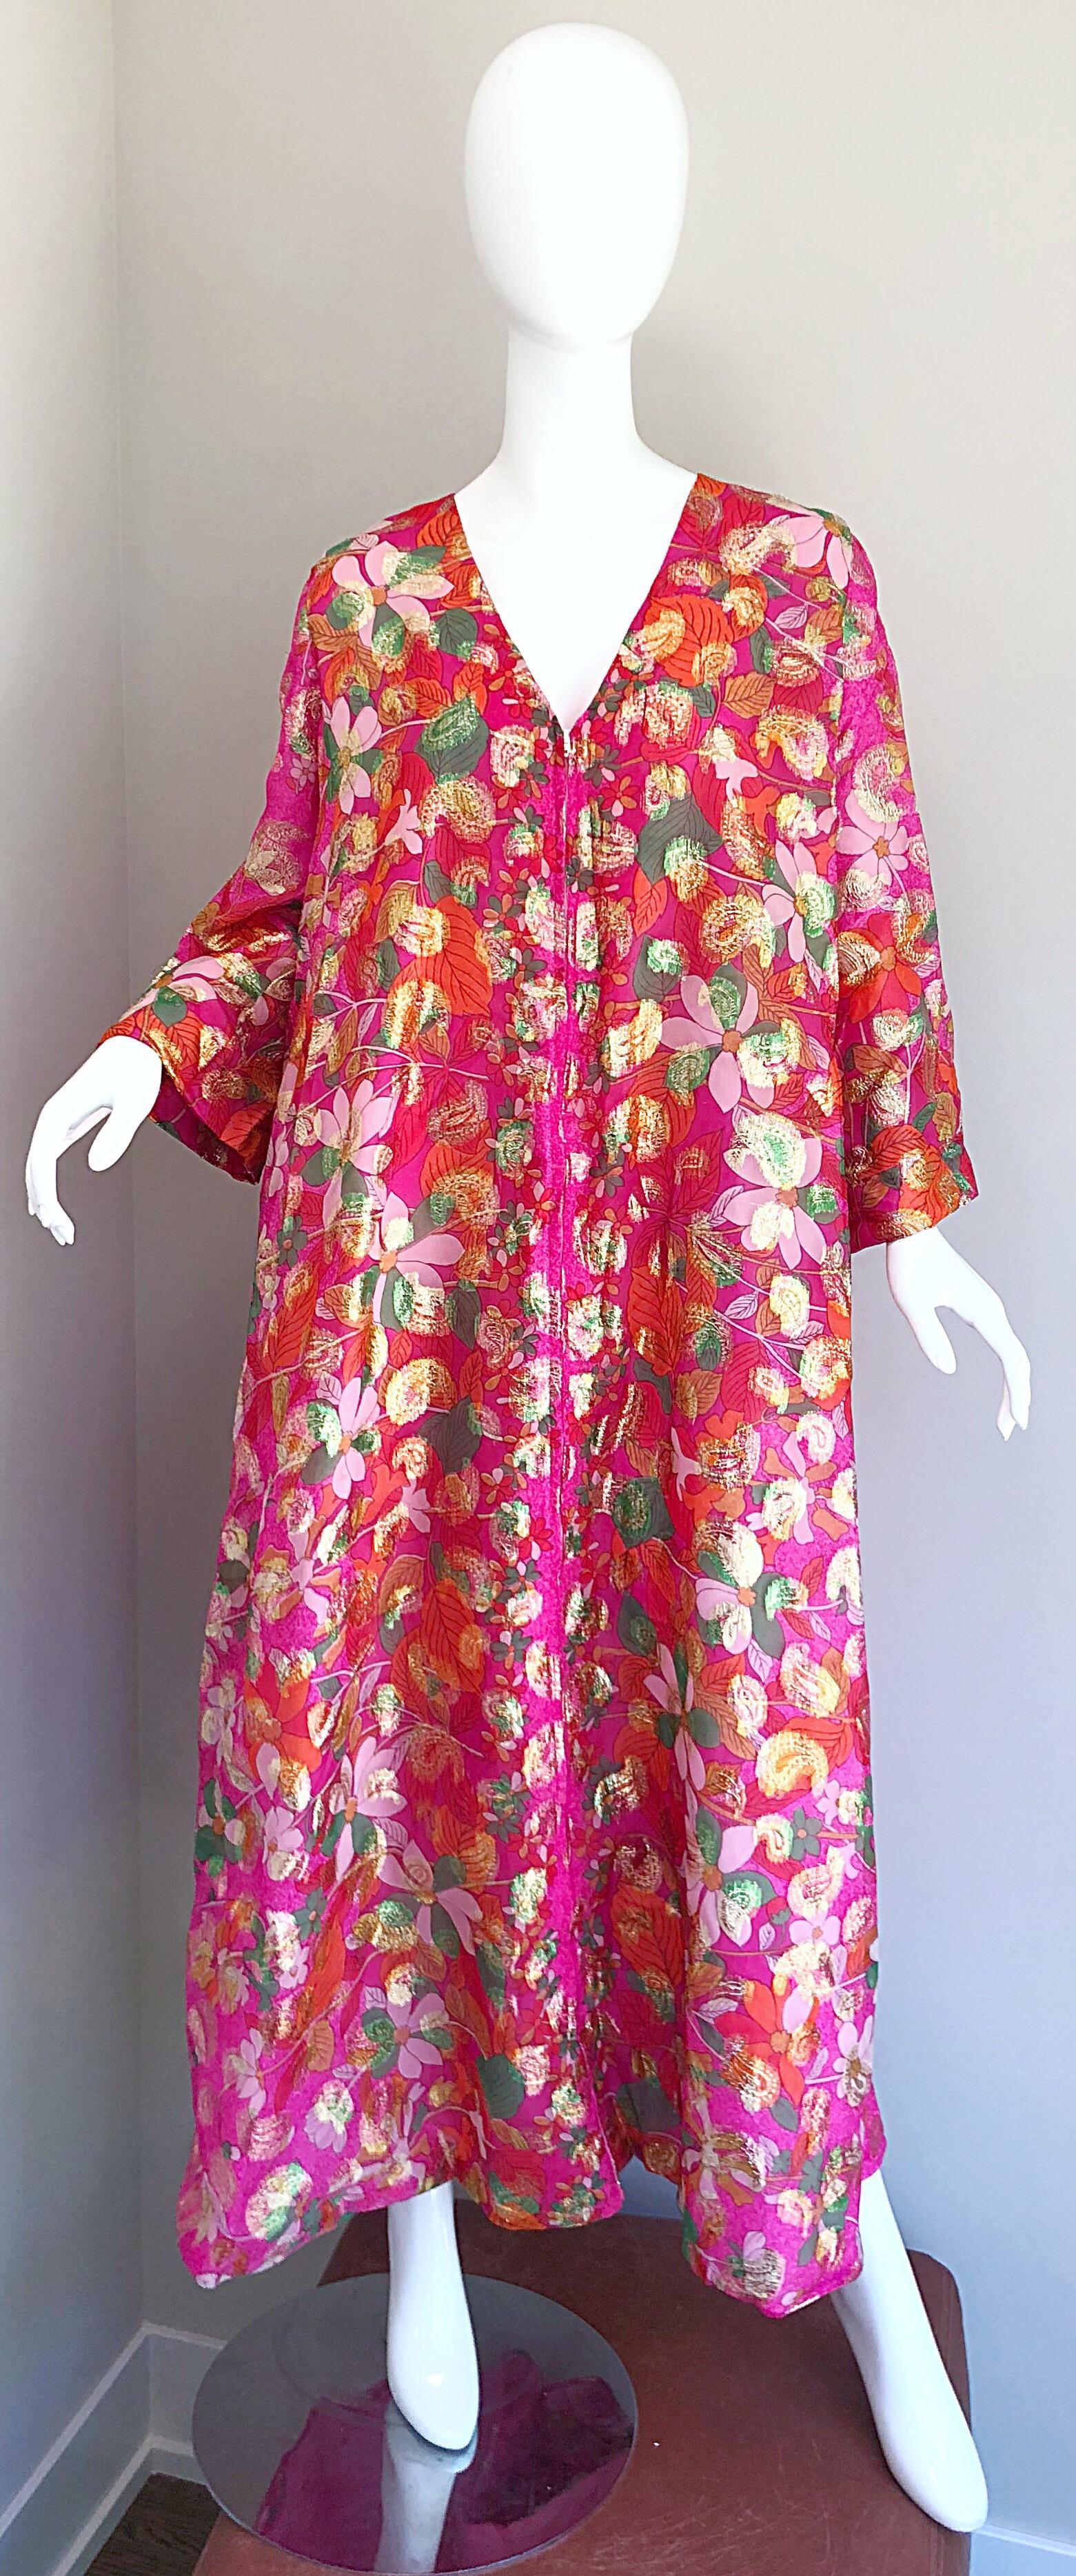 Incredible 70s vintage SAKS FIFTH AVENUE chiffon hot pink and gold kaftan! Features flowers and paisley prints throughout. Vibrant hot pink background, and colorful pops of green, turquoise blue, orange, fuchsia, and purple throughout. Full hidden